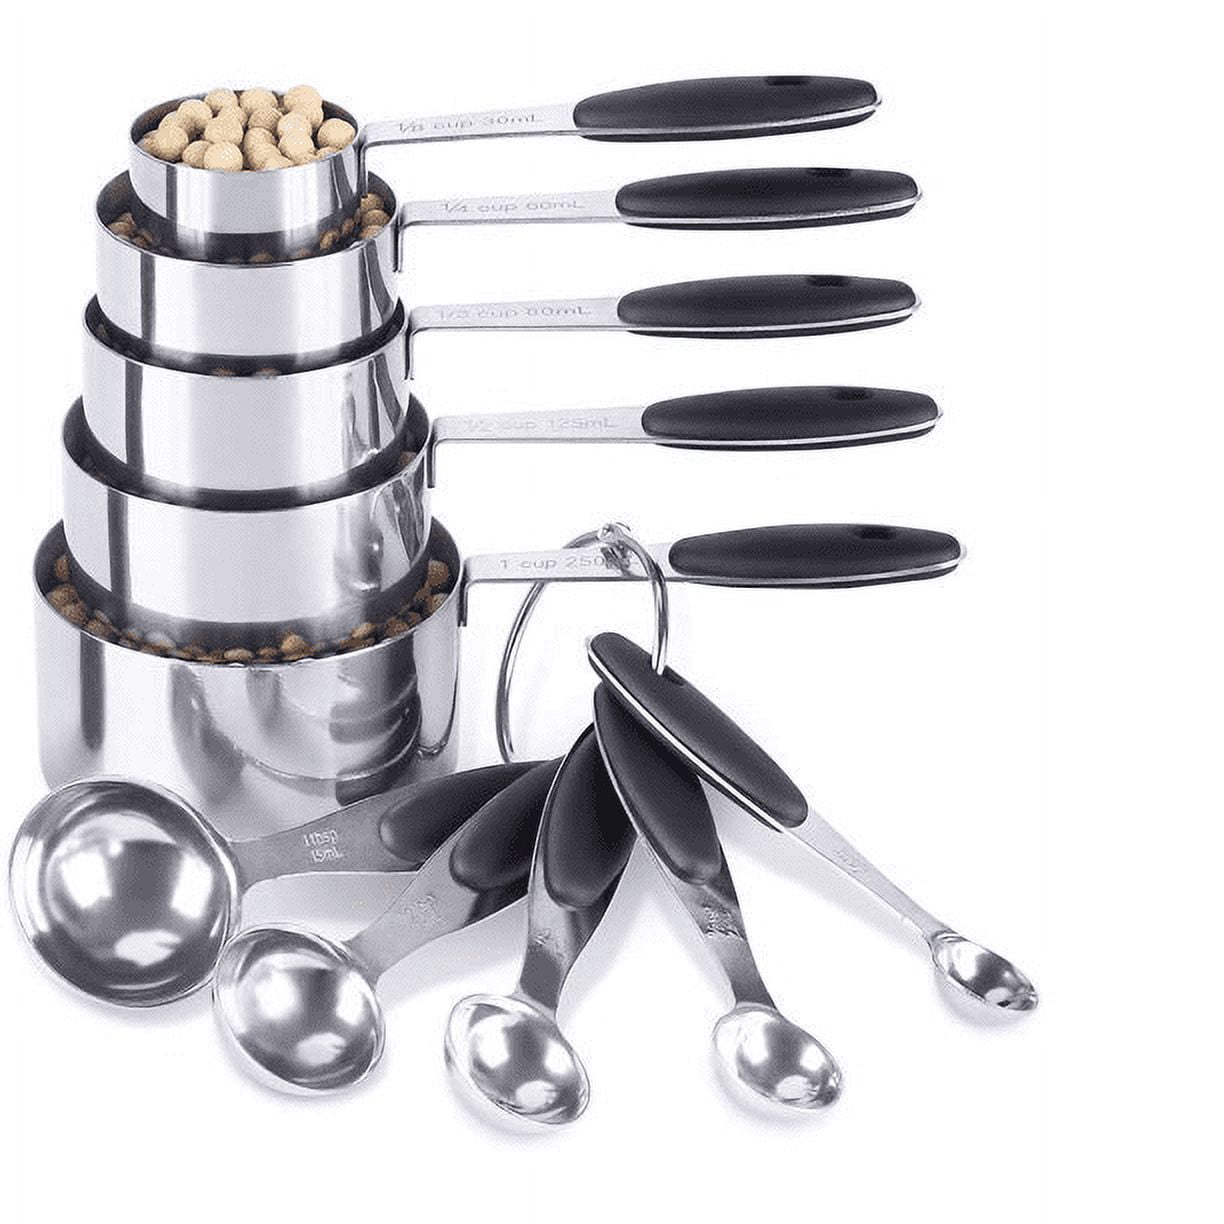 Spoons, Stainless Steel Metal Kitchen Tools Set For Dry And Liquid